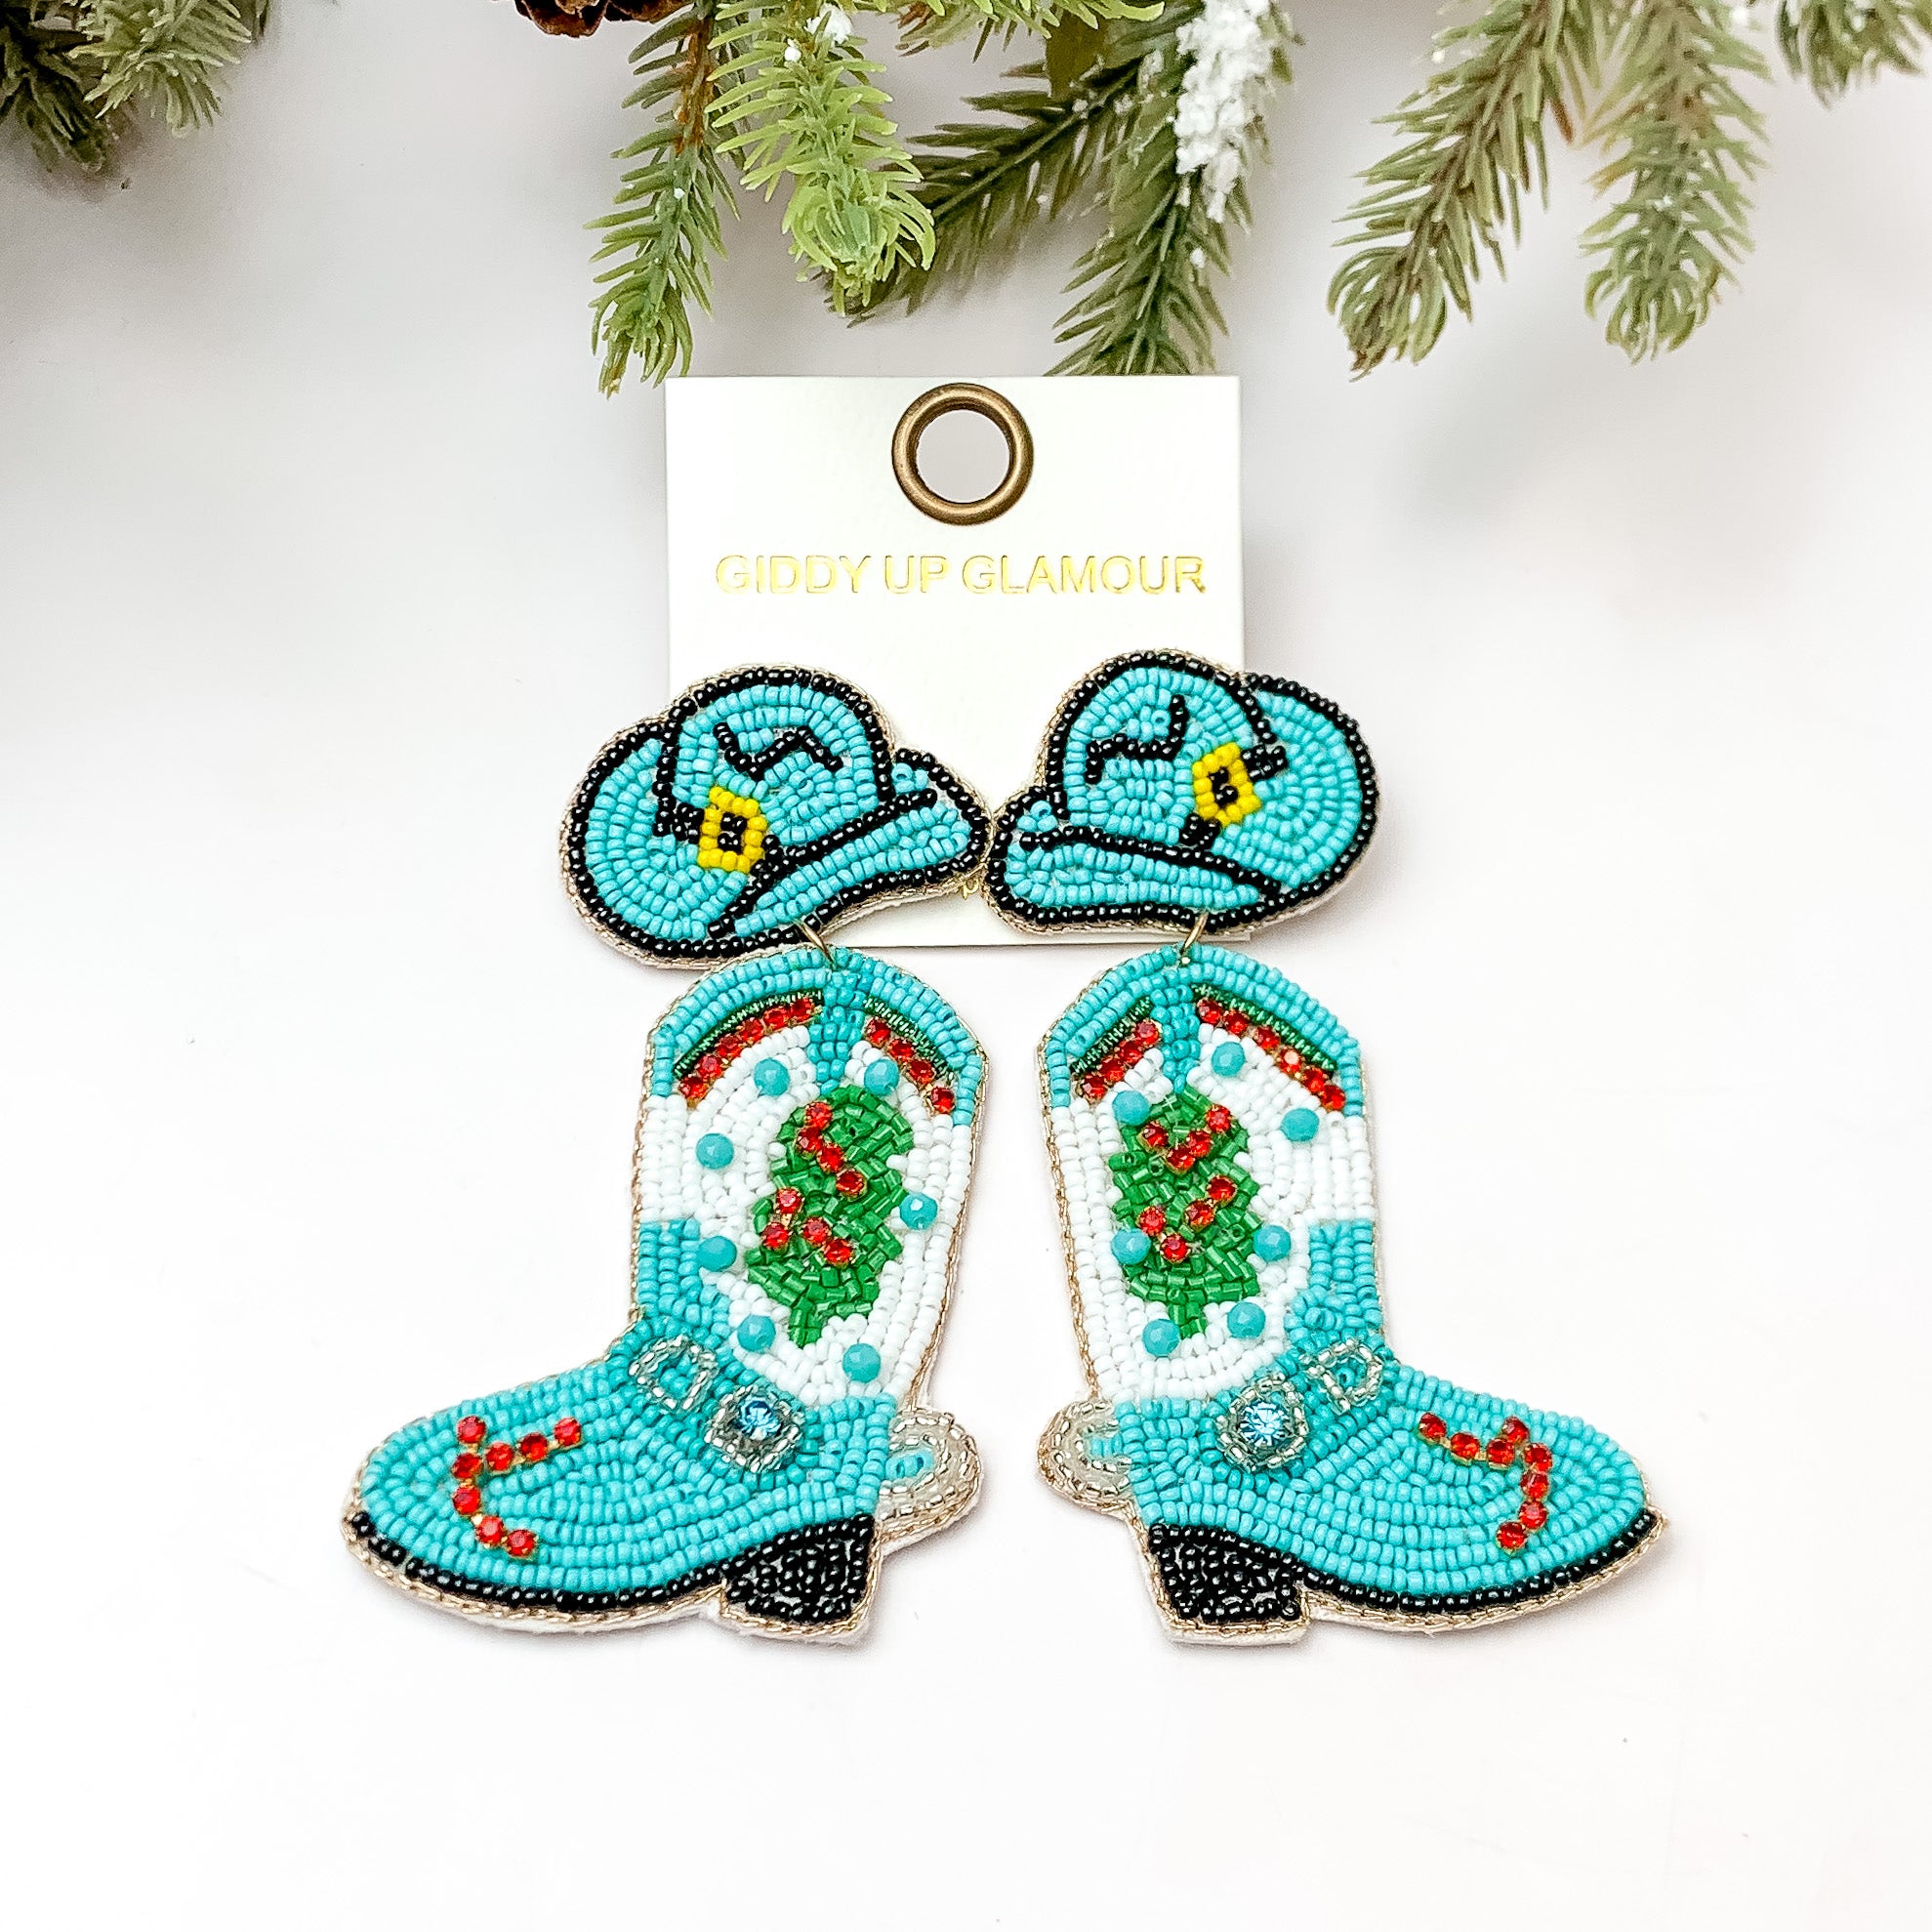 Beaded Cowboy Hat and Boot Earrings with a Christmas Tree in Turquoise Blue - Giddy Up Glamour Boutique